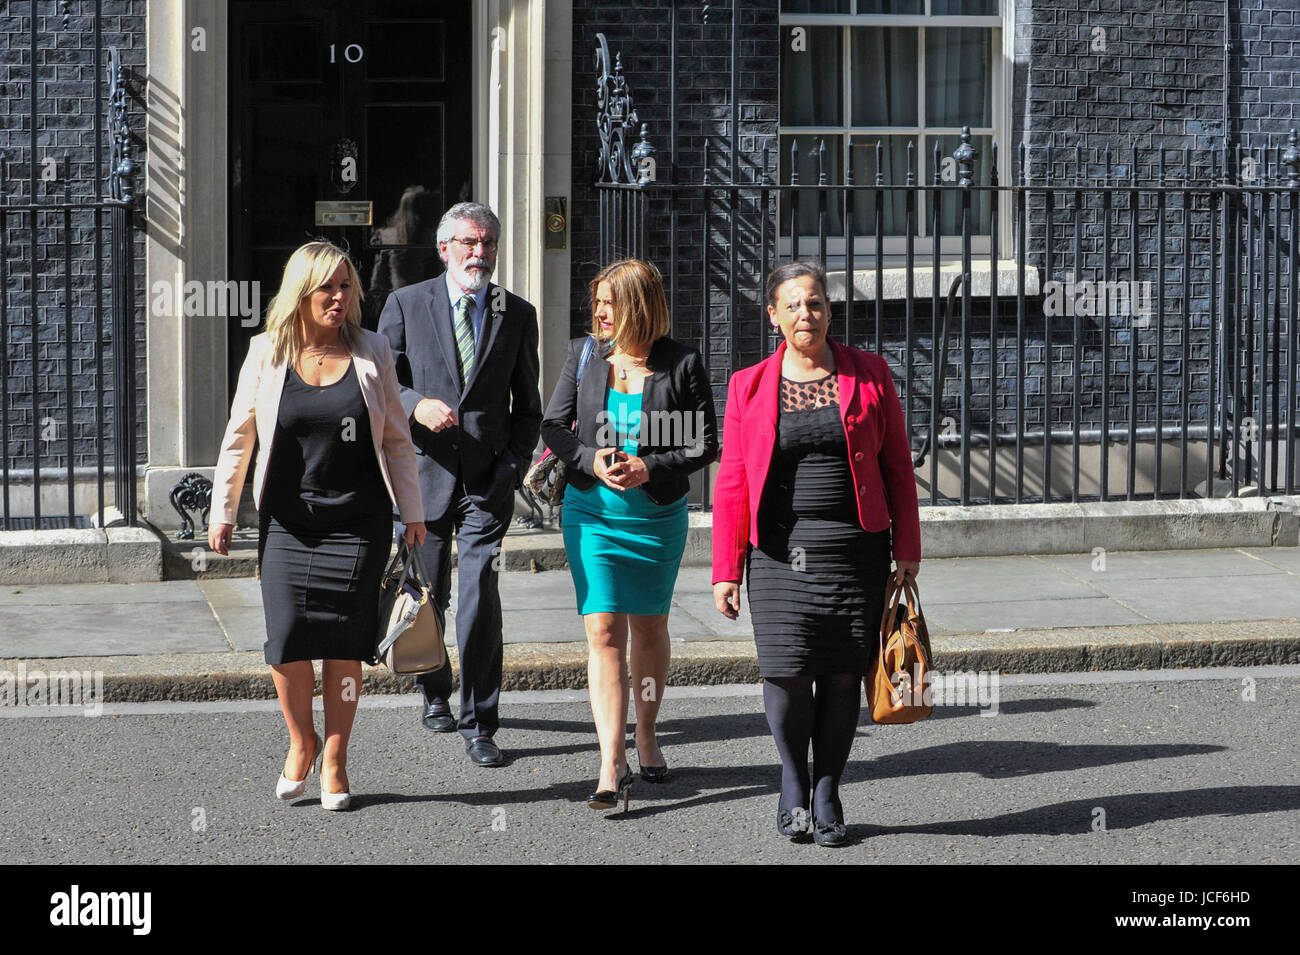 London, UK. 15th June, 2017. (L to R) Michelle O'Neill, leader of Sinn Féin, Gerry Adams, President, Mary Lou McDonald and Elisha McCallion exit Number 10. Members of the Northern Ireland Assembly visit Downing Street for talks with Prime Minister Theresa May following the results of the General Election. The Conservatives are seeking to work with the Democratic Unionist Party in order to form a minority government. Credit: Stephen Chung/Alamy Live News Stock Photo